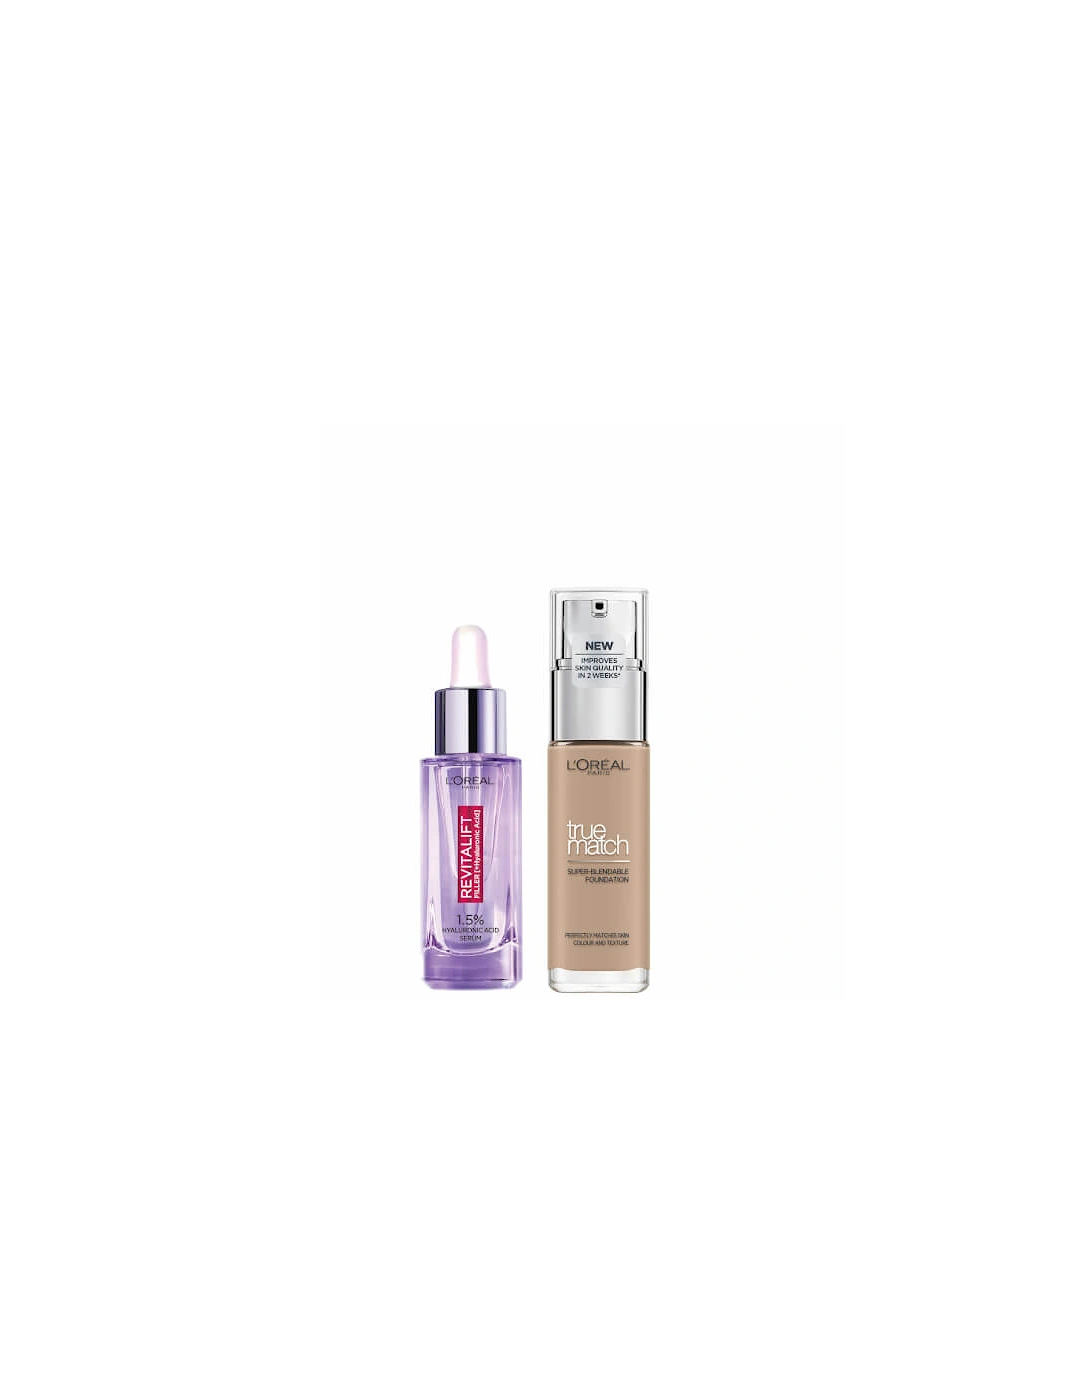 L’Oreal Paris Hyaluronic Acid Filler Serum and True Match Hyaluronic Acid Foundation Duo - 4N Beige, 2 of 1